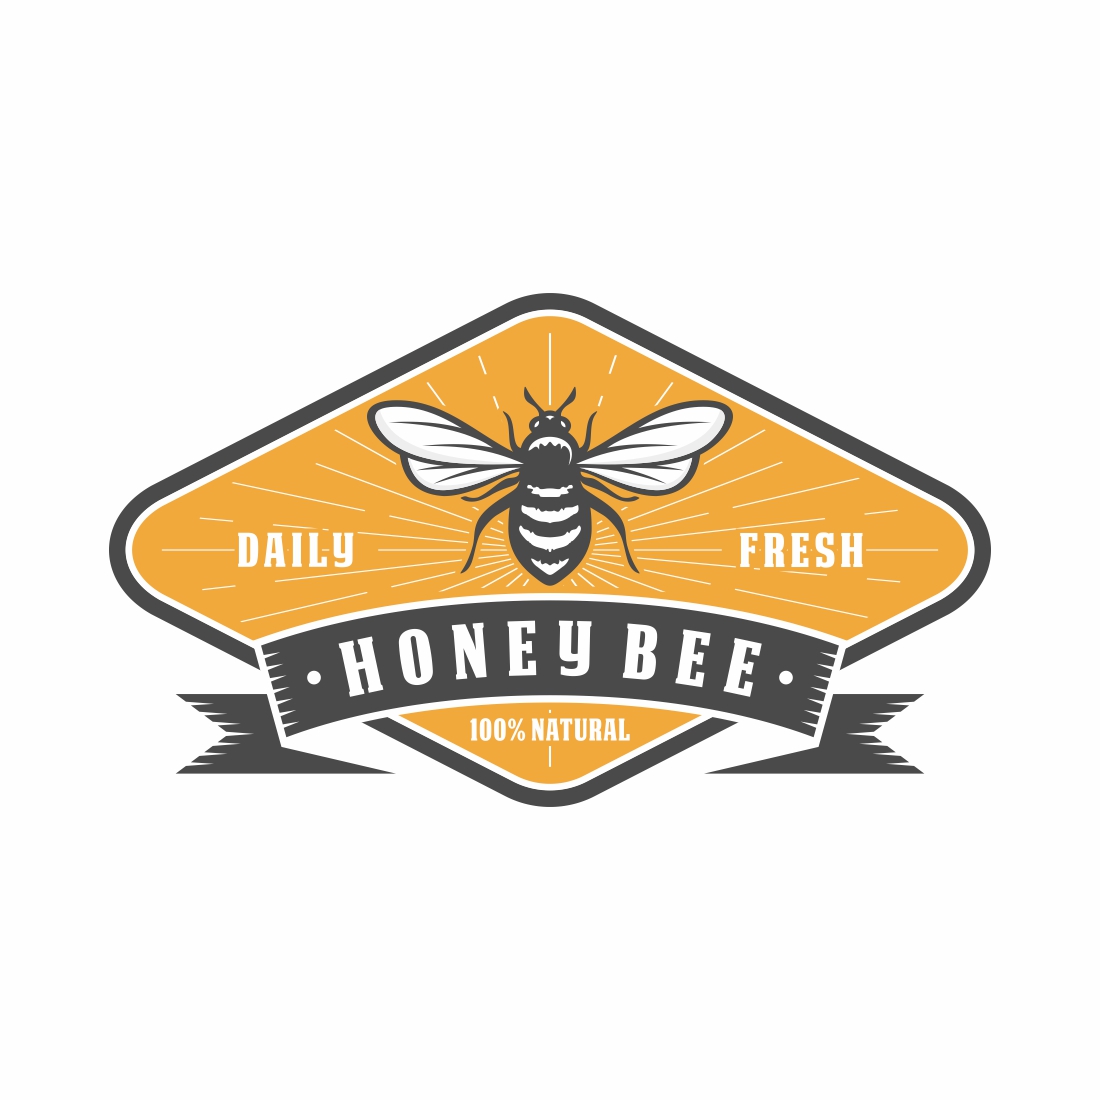 Honey Bee logo design - only 7$ preview image.